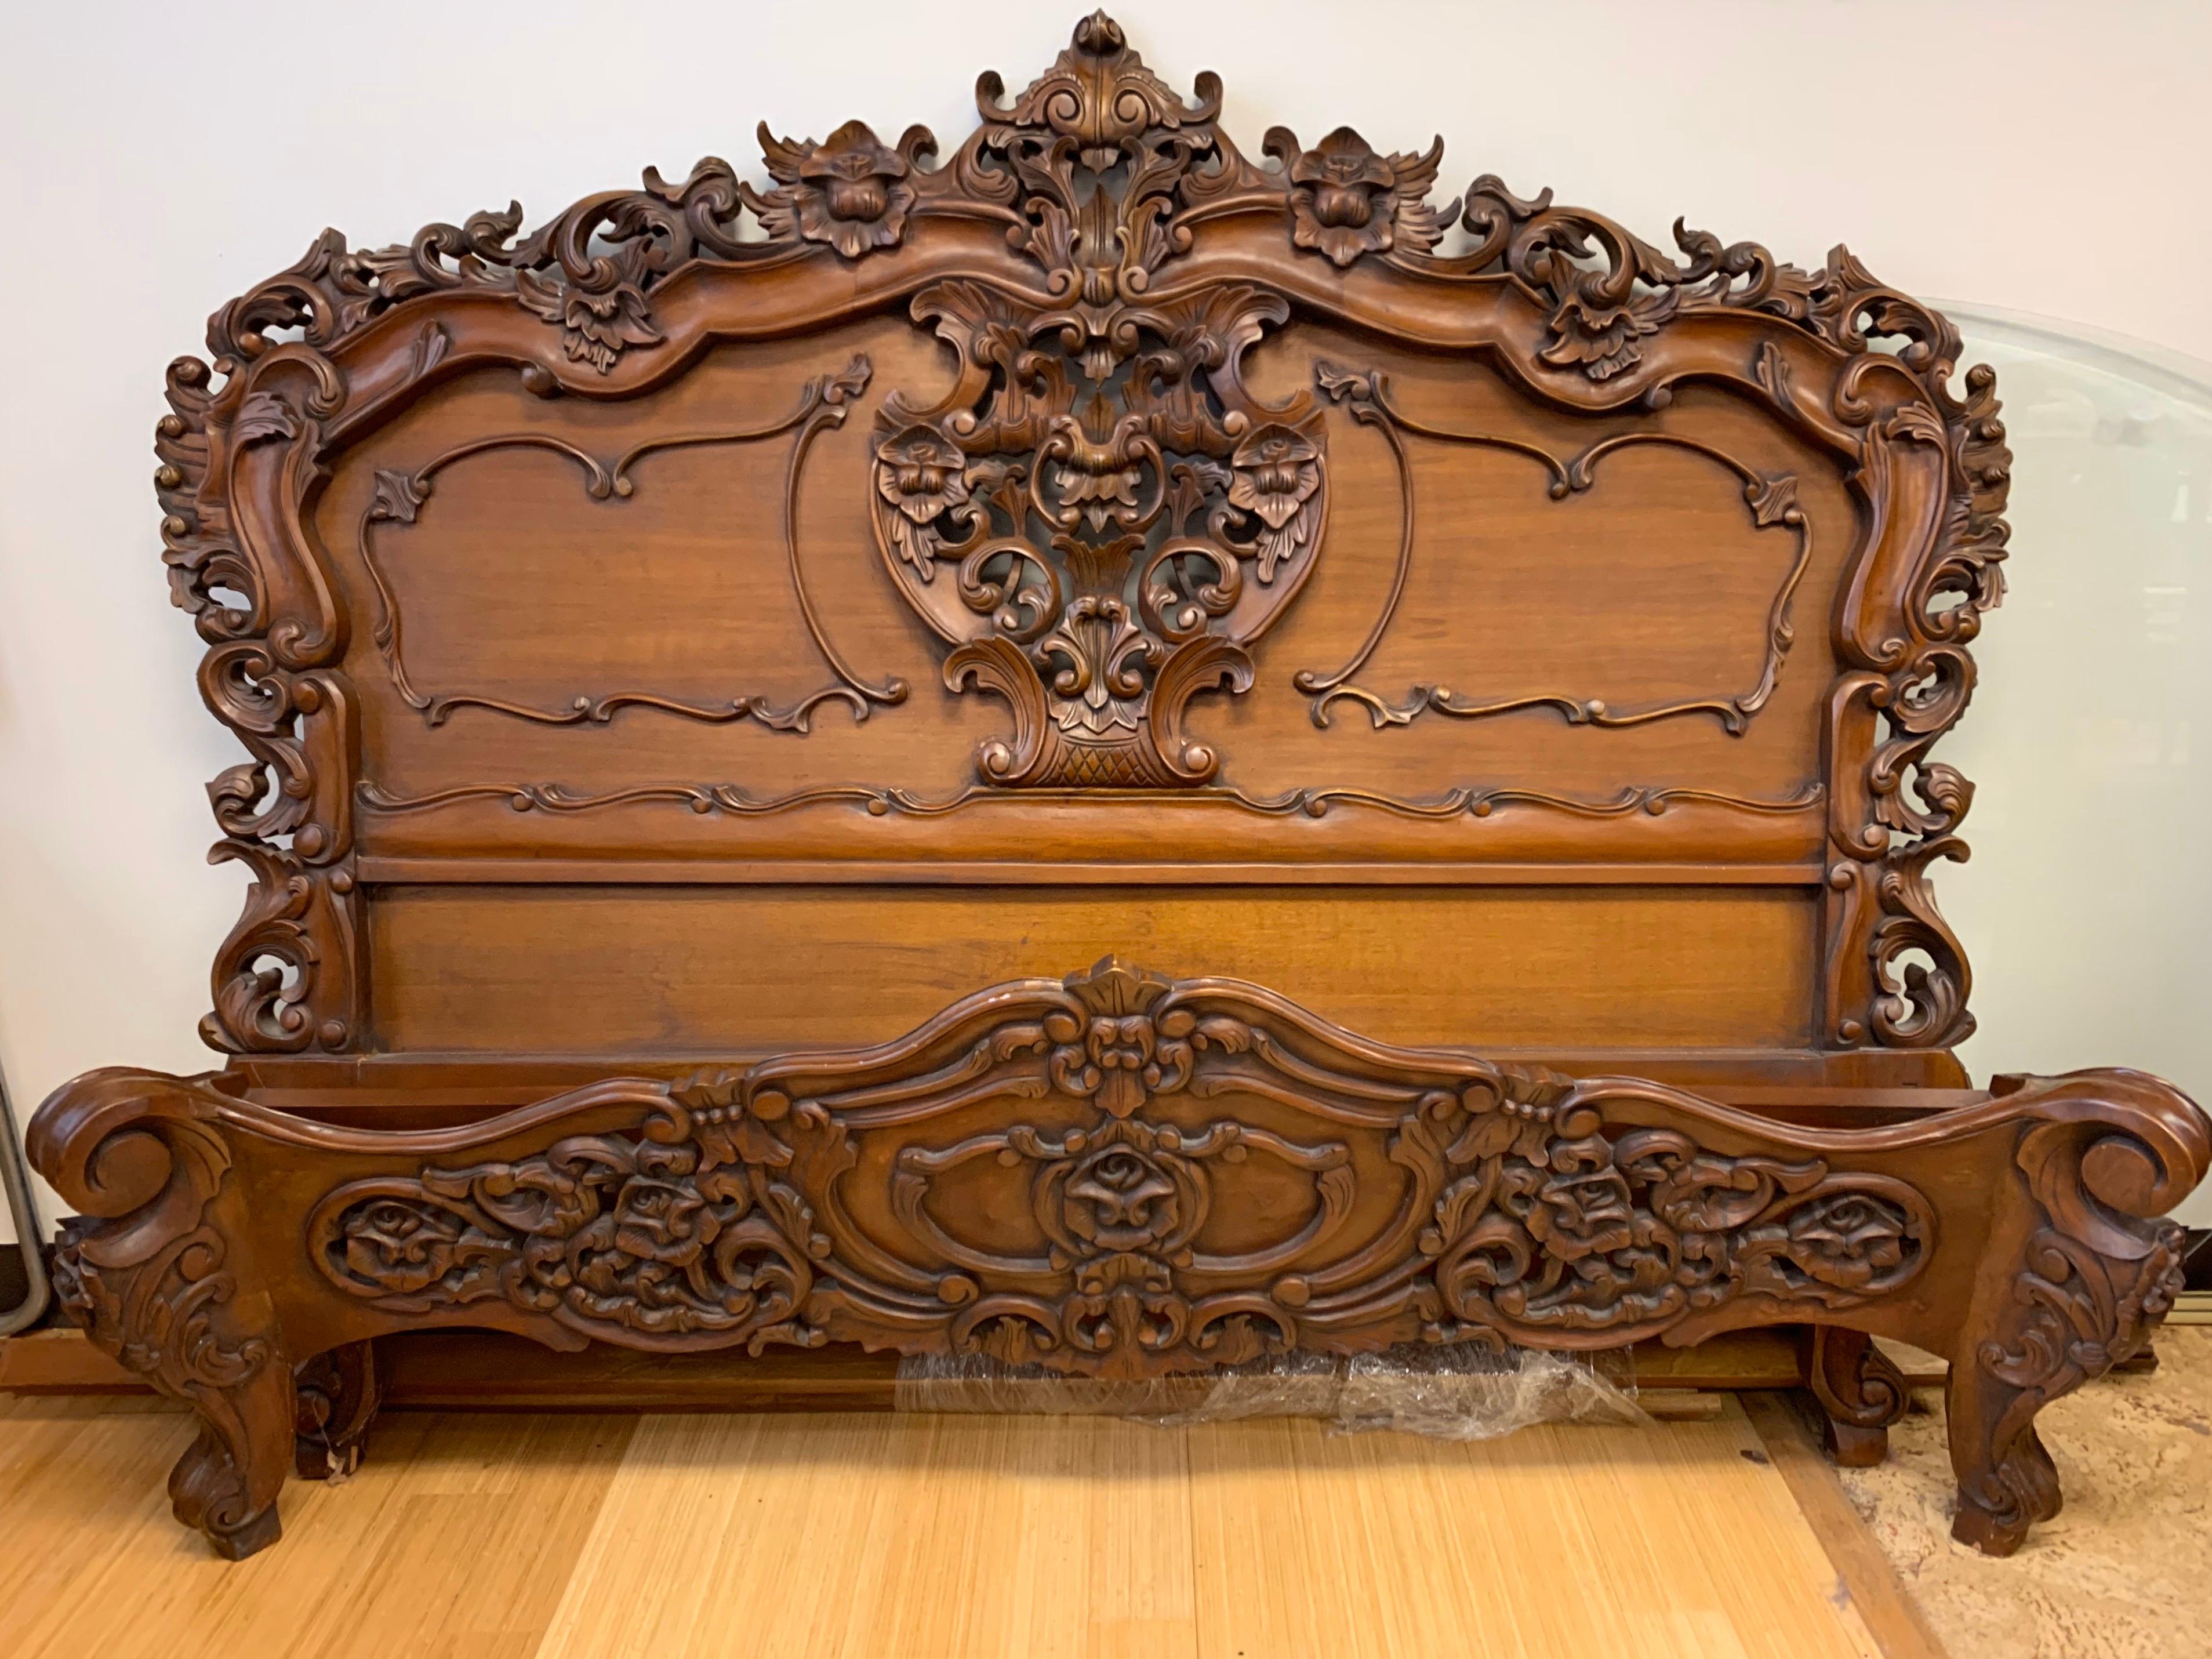 Intricately carved mahogany bed which will fit all queen size mattresses. Comes with headboard, footboard and rails. The carved workmanship on the wood is extraordinary. Set up is a breeze with slotted design.